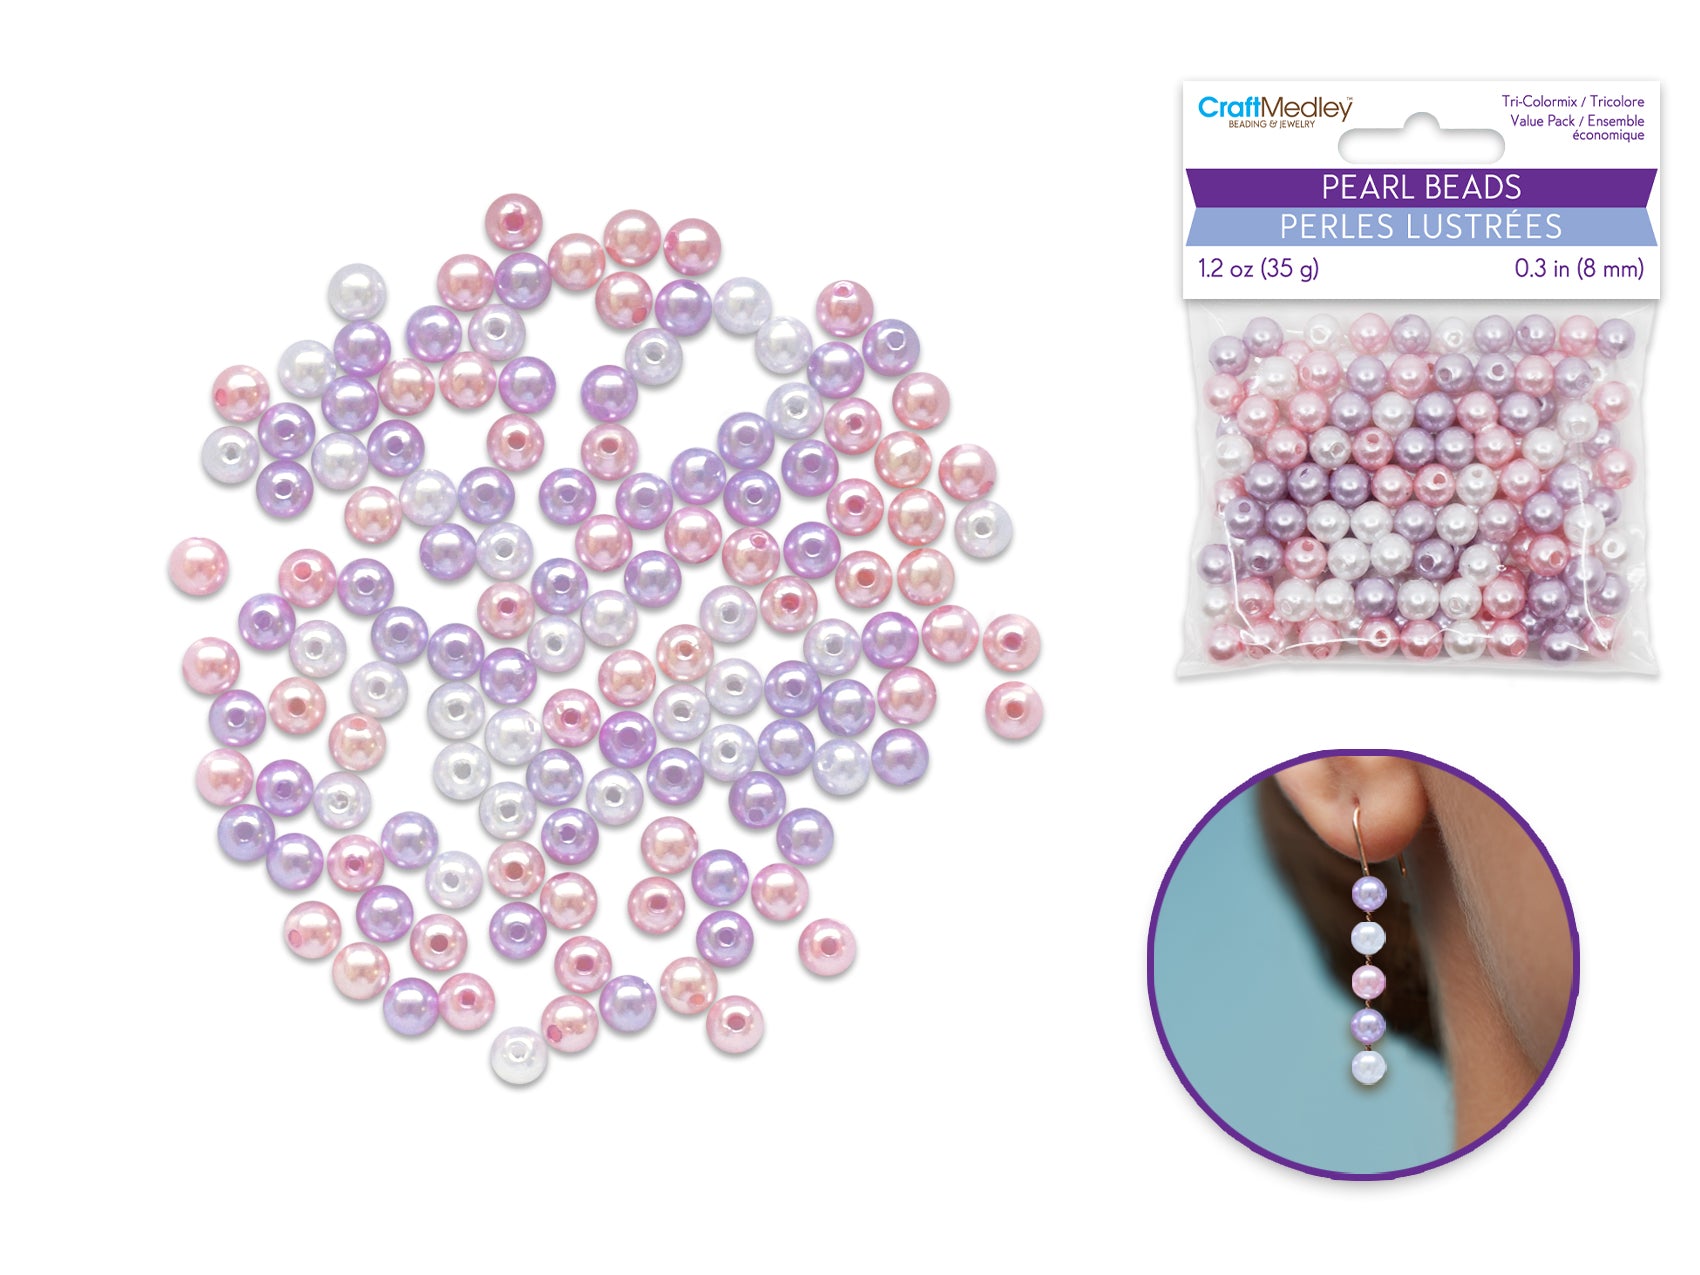 8mm Gloss Tri-Color Mix Pearl Beads, 35gms, Option B: Pink